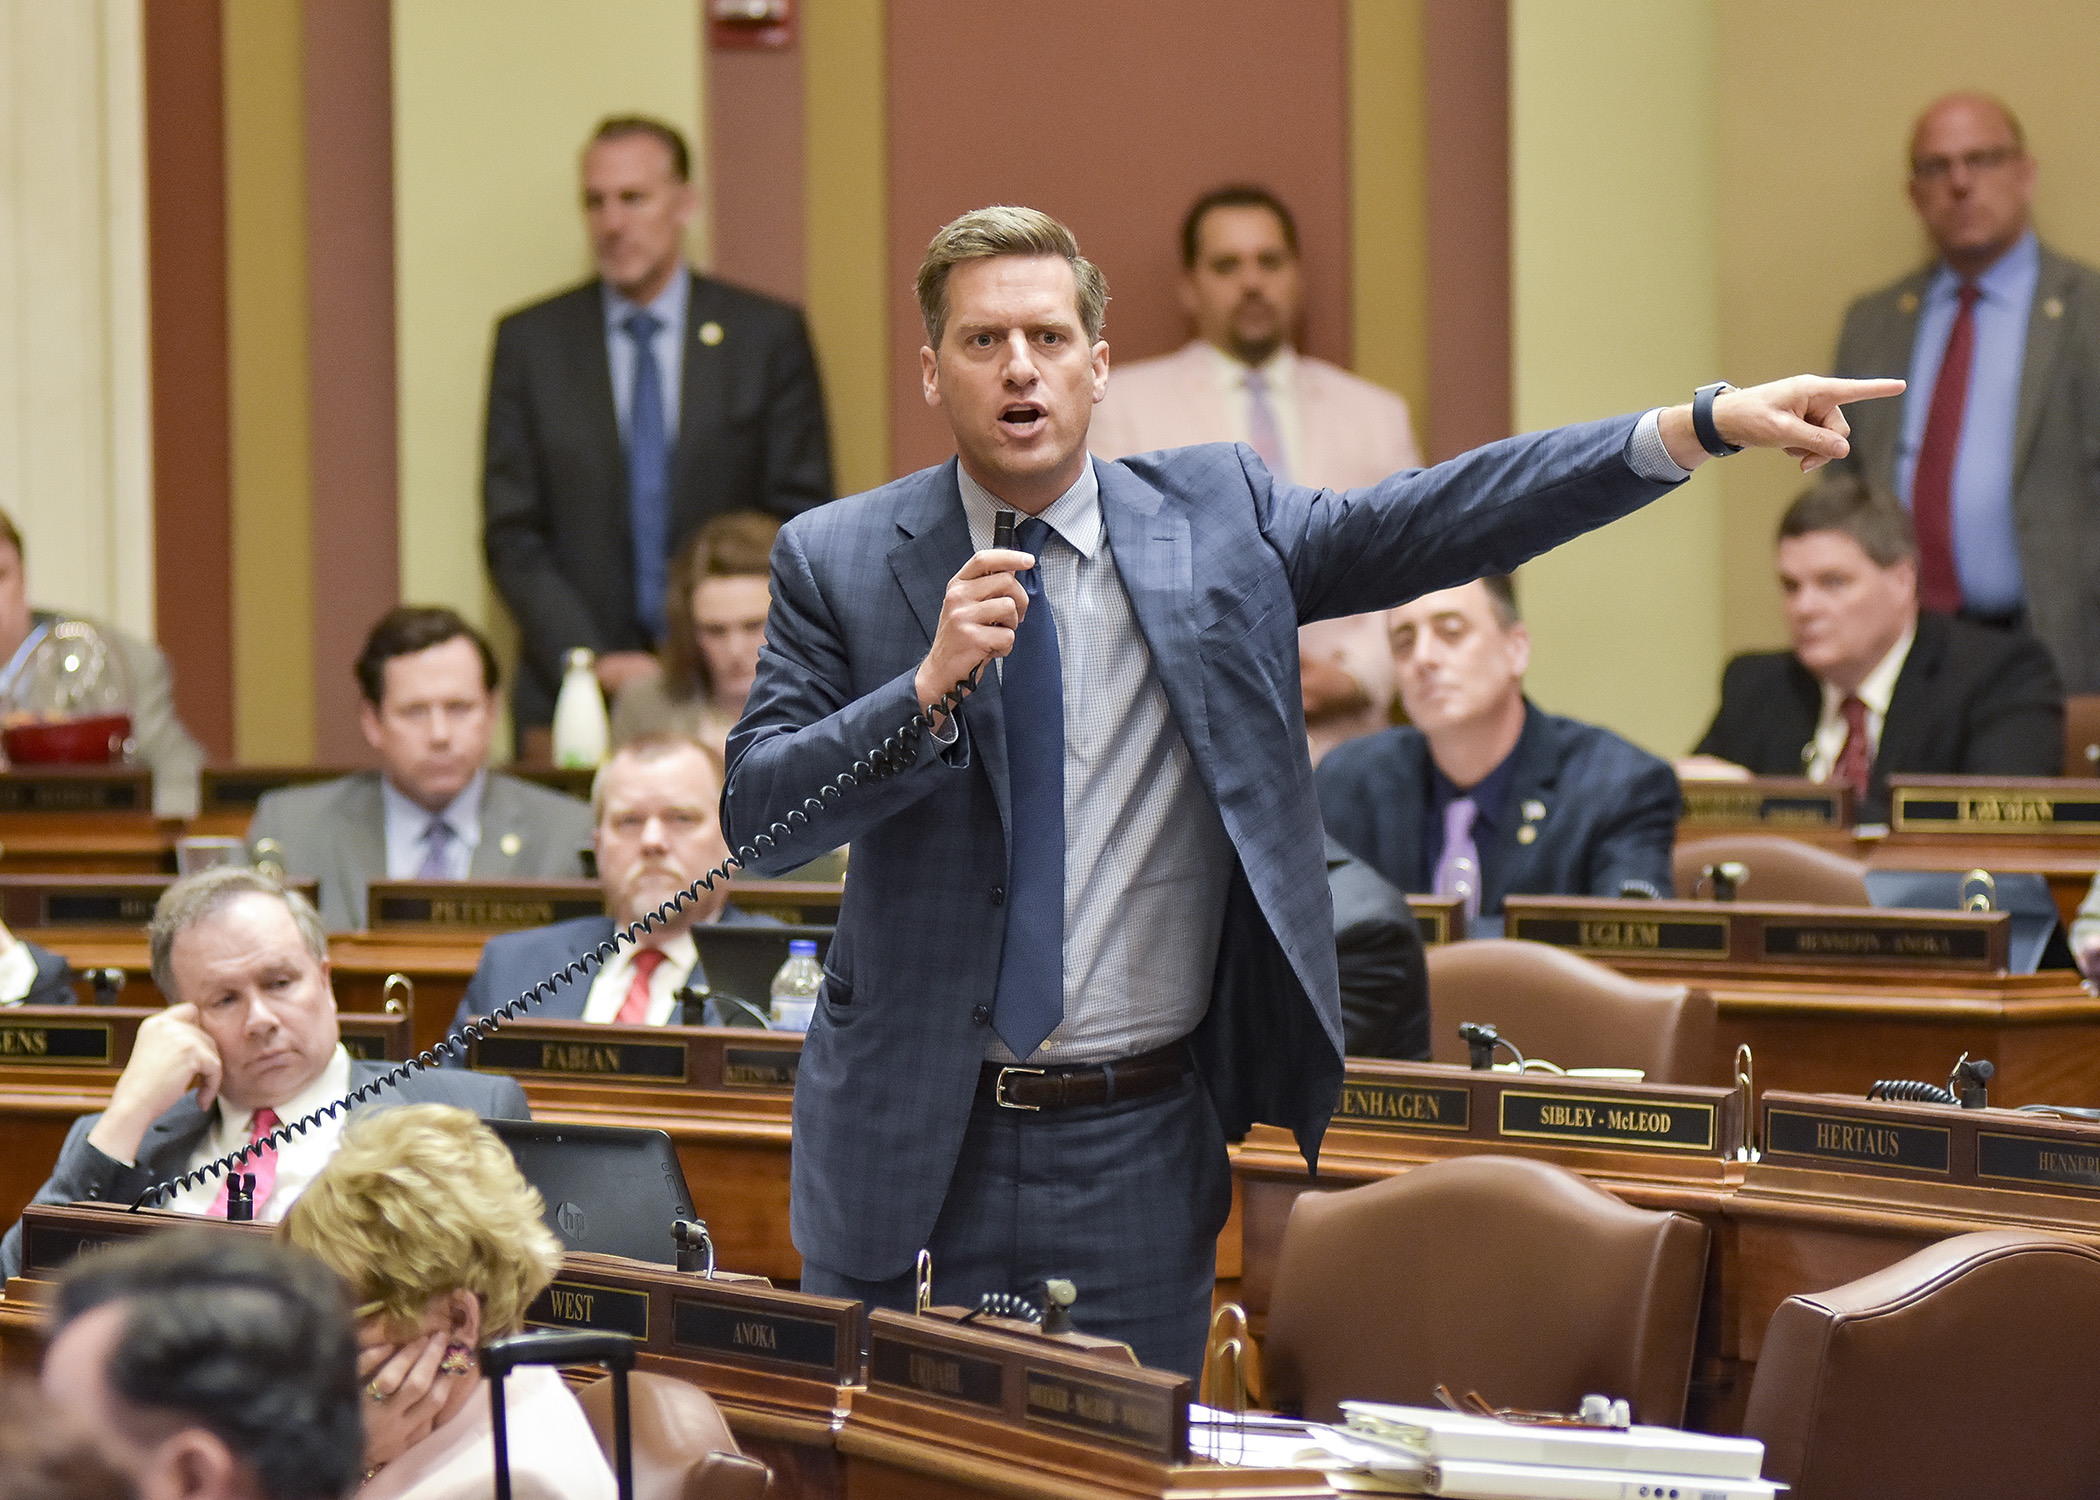 Rep. Kurt Daudt speaks on the House Floor. Daudt, a former House speaker from 2015 to 2019, announced he will resign from the House of Representatives effective Feb. 11. (House Photography file photo)